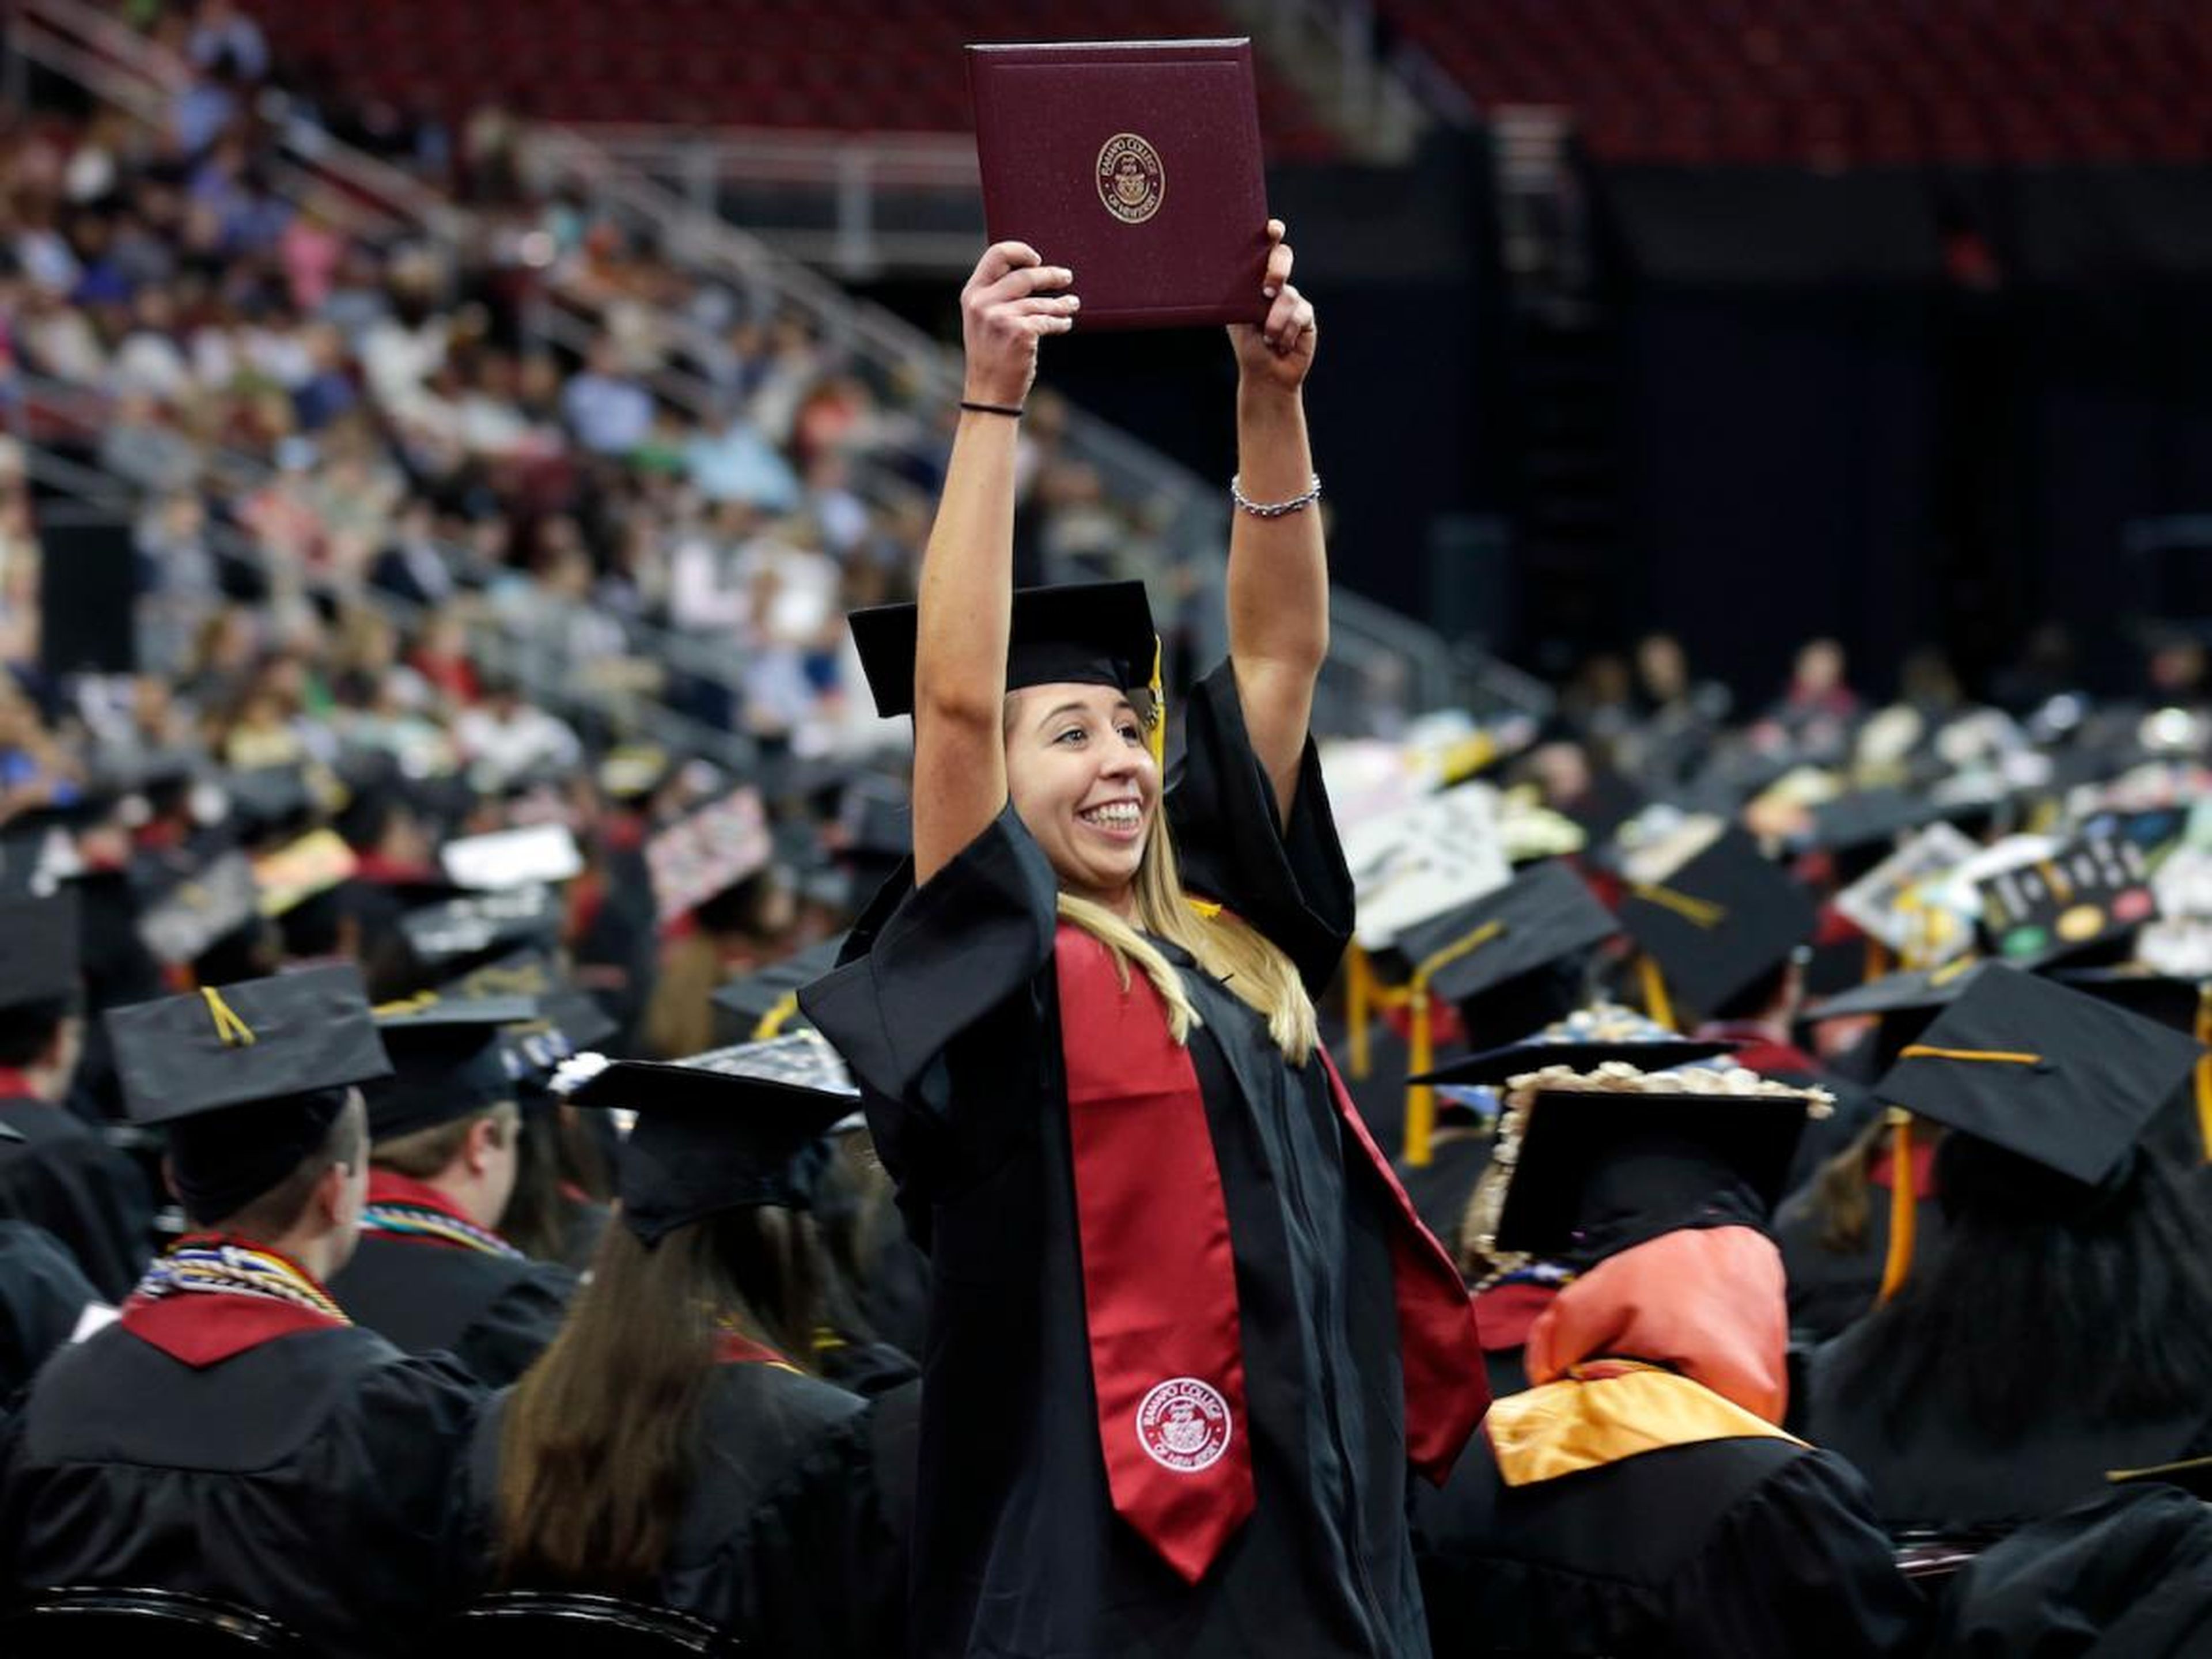 Emma O'Donoghue holds up her diploma as she returns to her seat during an undergraduate commencement ceremony for Ramapo College in Newark, N.J., Thursday, May 10, 2018.